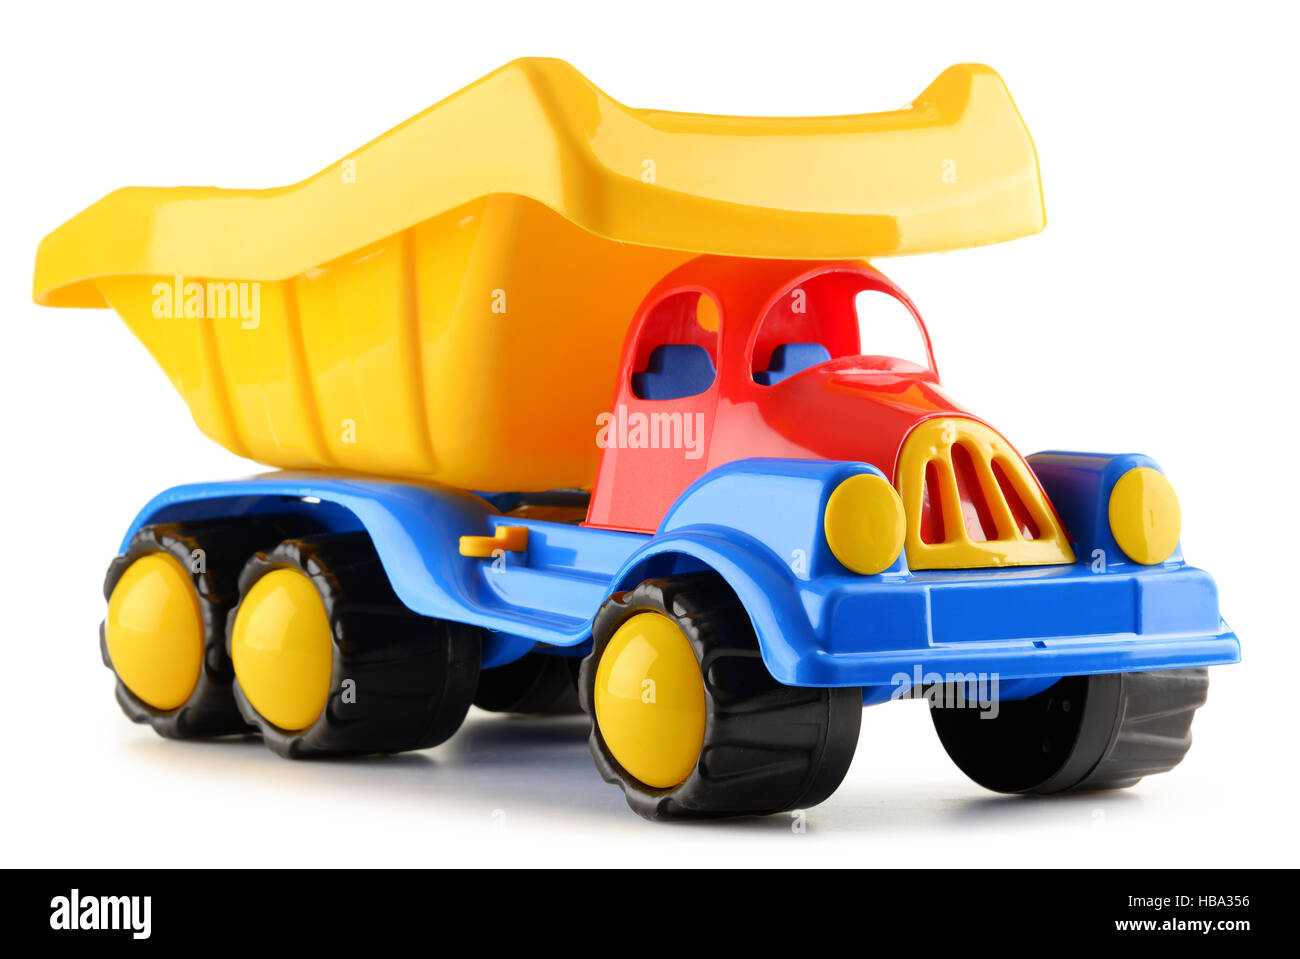 Colorful plastic truck toy isolated on white Stock Photo